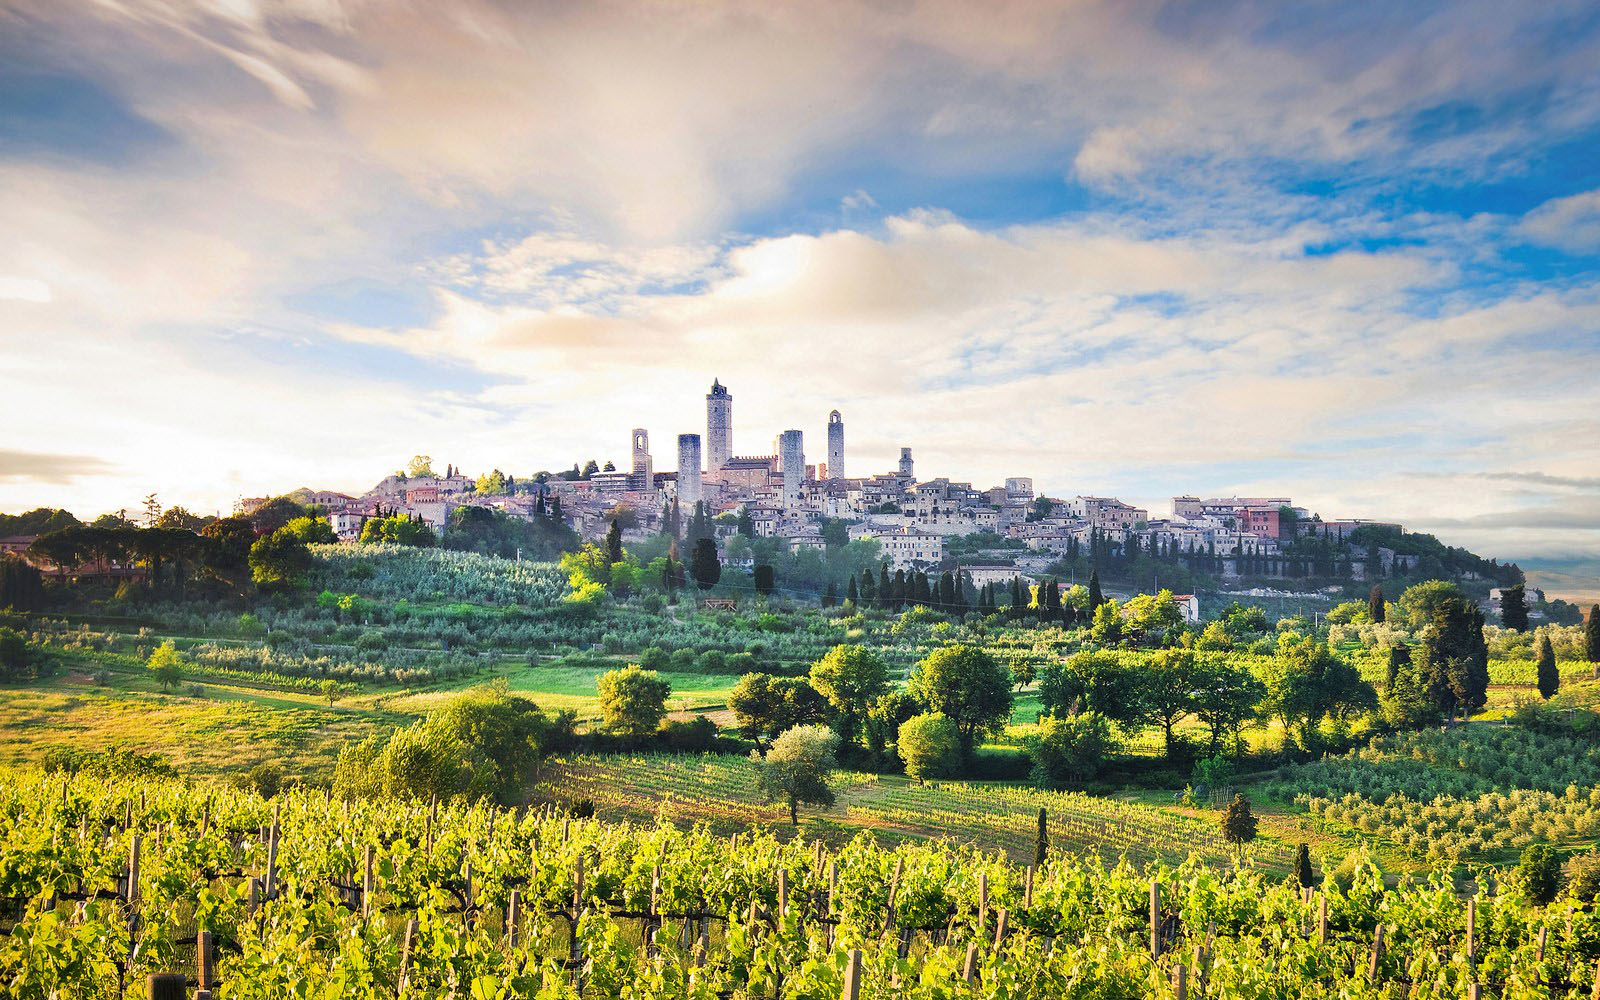 Umbria trips and itineraries